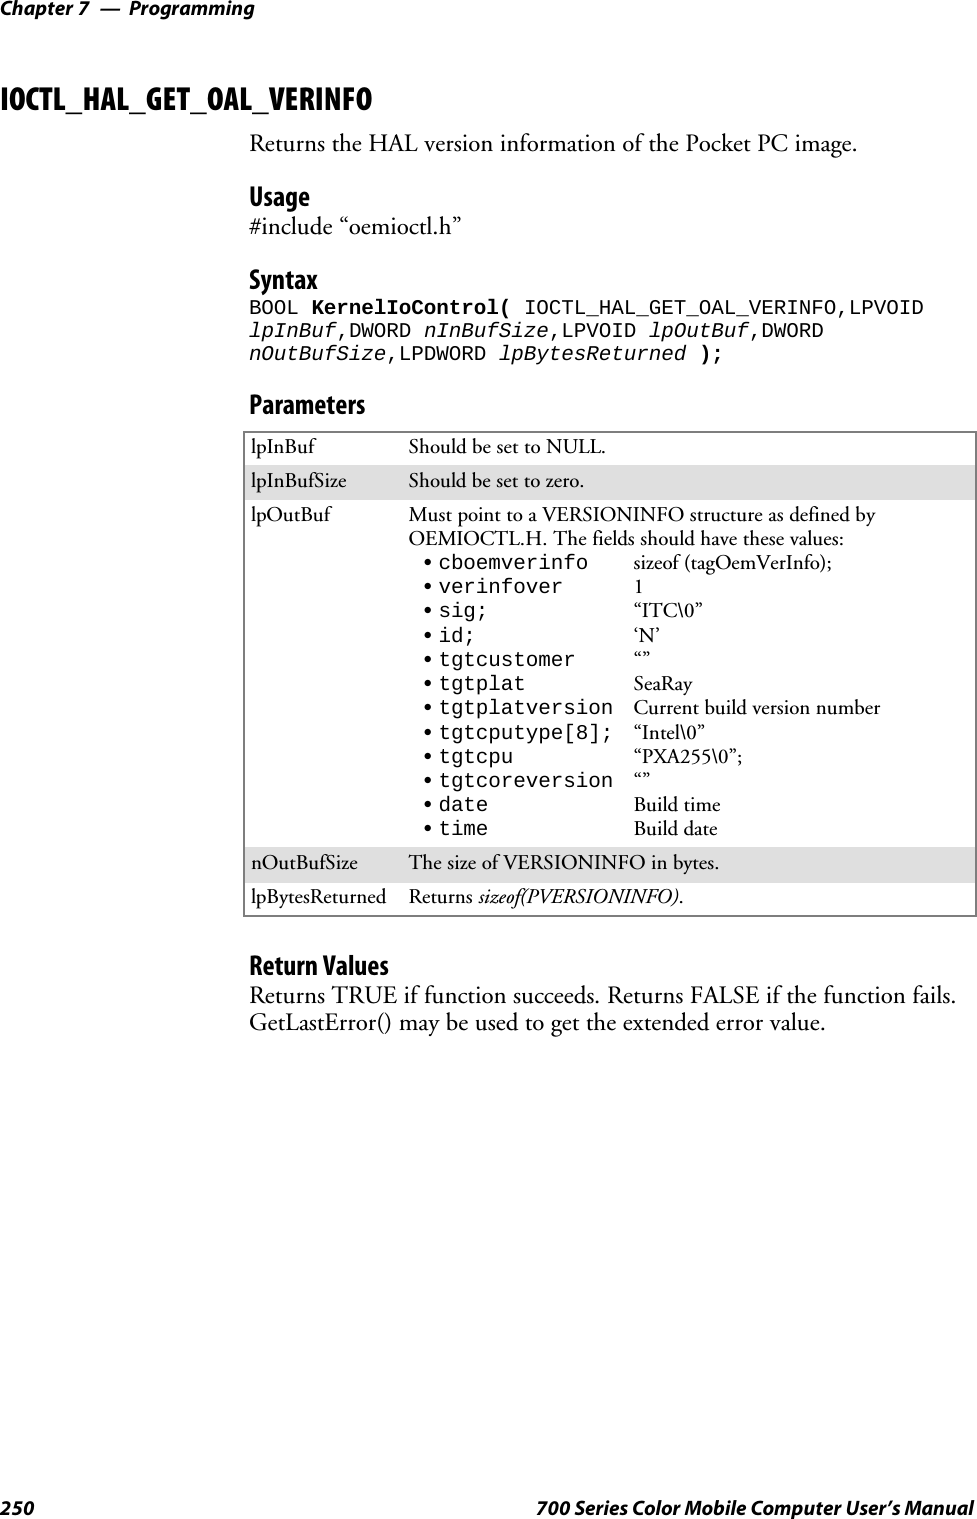 ProgrammingChapter —7250 700 Series Color Mobile Computer User’s ManualIOCTL_HAL_GET_OAL_VERINFOReturns the HAL version information of the Pocket PC image.Usage#include “oemioctl.h”SyntaxBOOL KernelIoControl( IOCTL_HAL_GET_OAL_VERINFO,LPVOIDlpInBuf,DWORD nInBufSize,LPVOID lpOutBuf,DWORDnOutBufSize,LPDWORD lpBytesReturned );ParameterslpInBuf Should be set to NULL.lpInBufSize Should be set to zero.lpOutBuf Must point to a VERSIONINFO structure as defined byOEMIOCTL.H. The fields should have these values:Scboemverinfo sizeof (tagOemVerInfo);Sverinfover 1Ssig; “ITC\0”Sid; ‘N’Stgtcustomer “”Stgtplat SeaRayStgtplatversion Current build version numberStgtcputype[8]; “Intel\0”Stgtcpu “PXA255\0”;Stgtcoreversion “”Sdate Build timeStime Build datenOutBufSize ThesizeofVERSIONINFOinbytes.lpBytesReturned Returns sizeof(PVERSIONINFO).Return ValuesReturns TRUE if function succeeds. Returns FALSE if the function fails.GetLastError() may be used to get the extended error value.